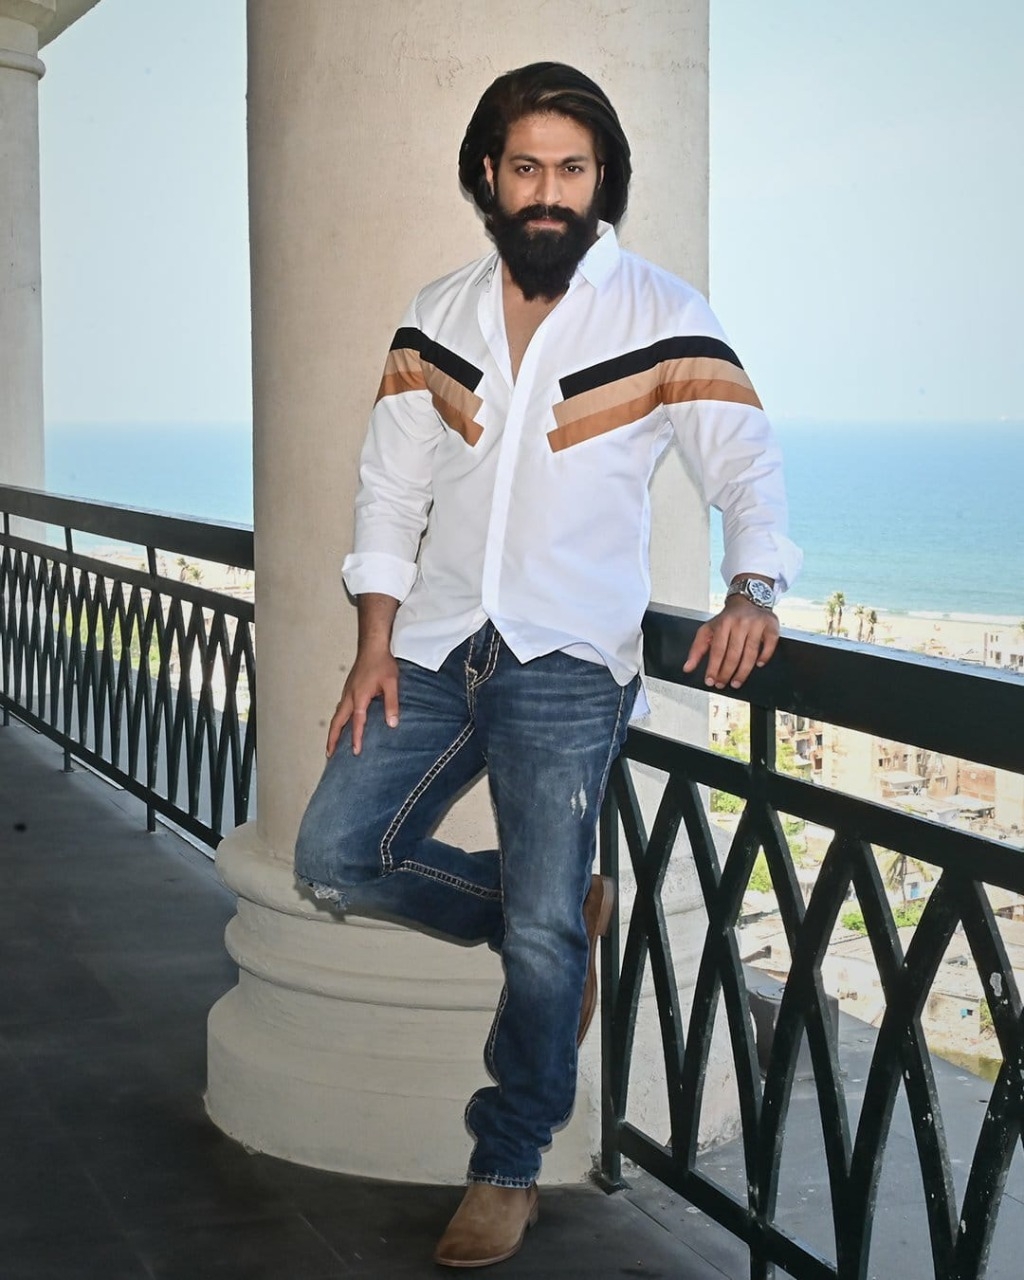 KGF makers reveal Yash likely to be replaced after fifth film: 'Just like  James Bond series, heroes keep changing' | Entertainment News - News9live